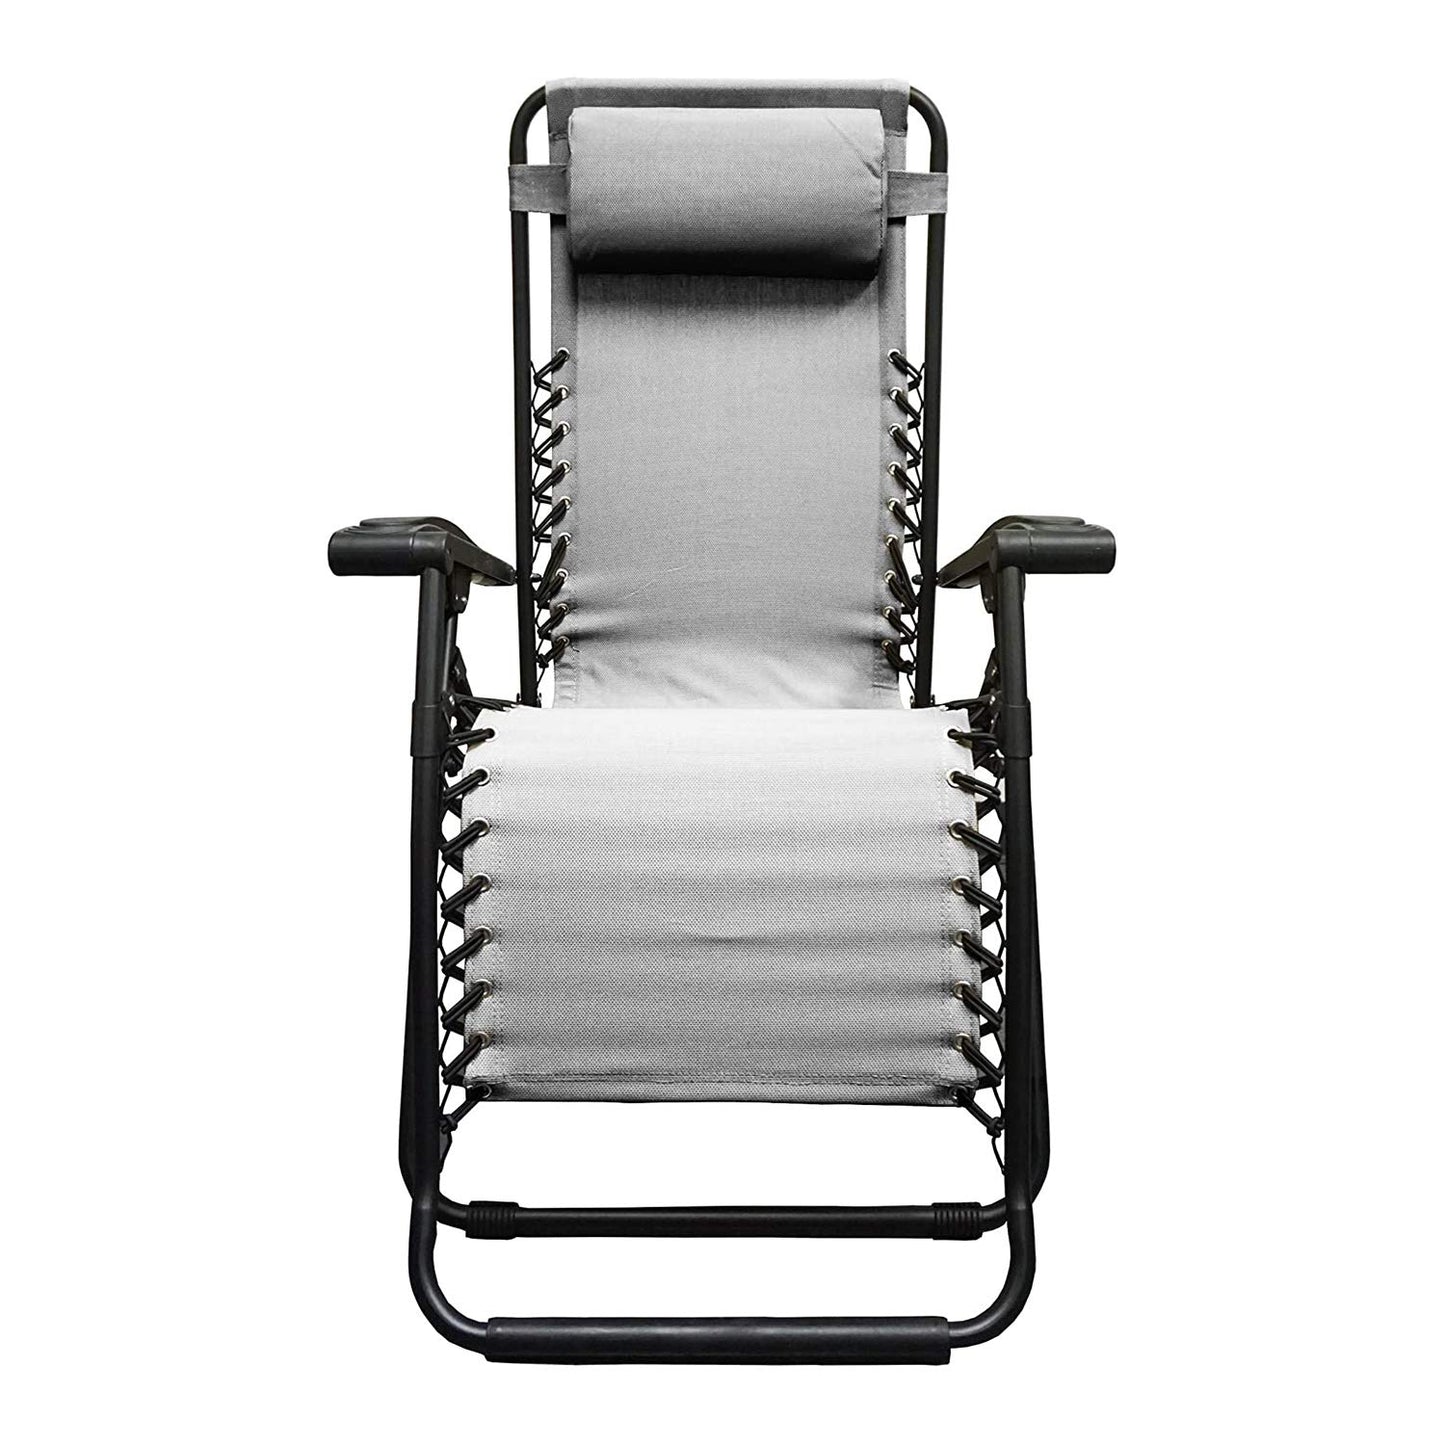 Caravan Sports Zero Gravity Outdoor Portable Folding Camping Lawn Deck Patio Pool Recliner Lounge Chair for Adults, Adjustable Headrest, Gray Grey